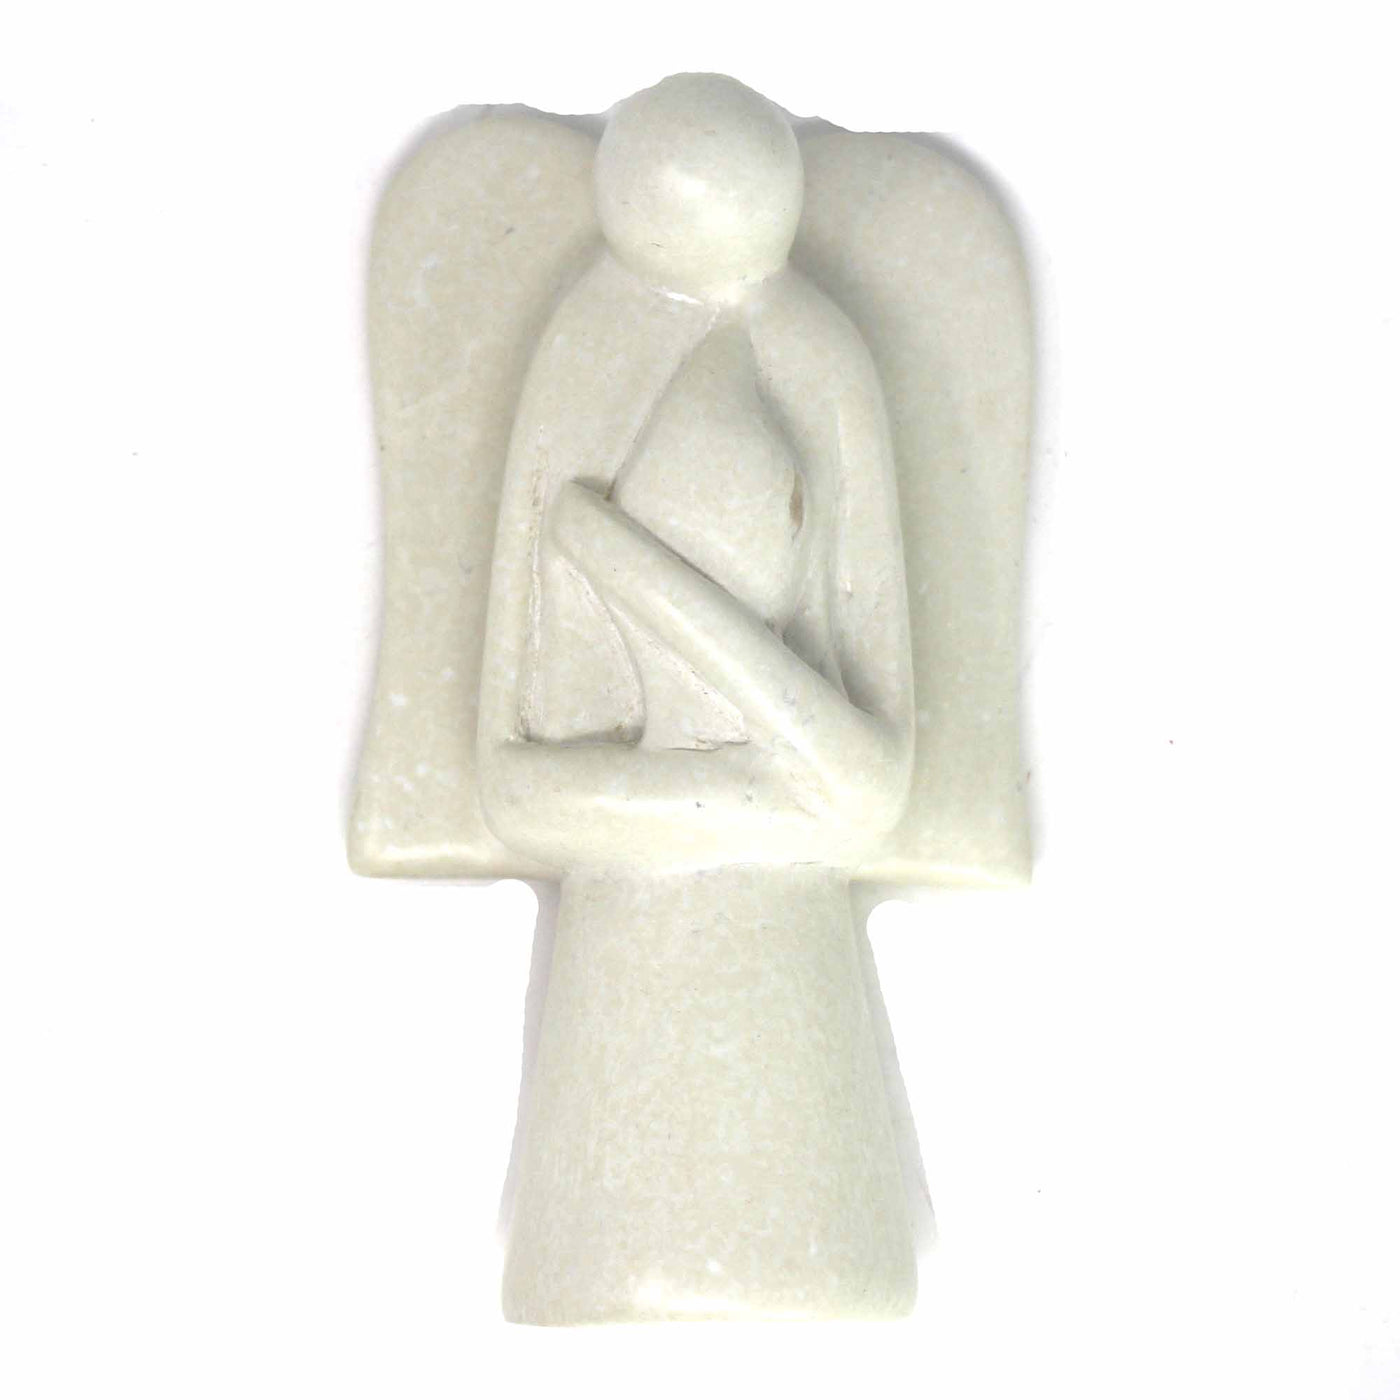 Angel Soapstone Sculpture with Eternal Light - Yvonne’s 100th Wish Inc